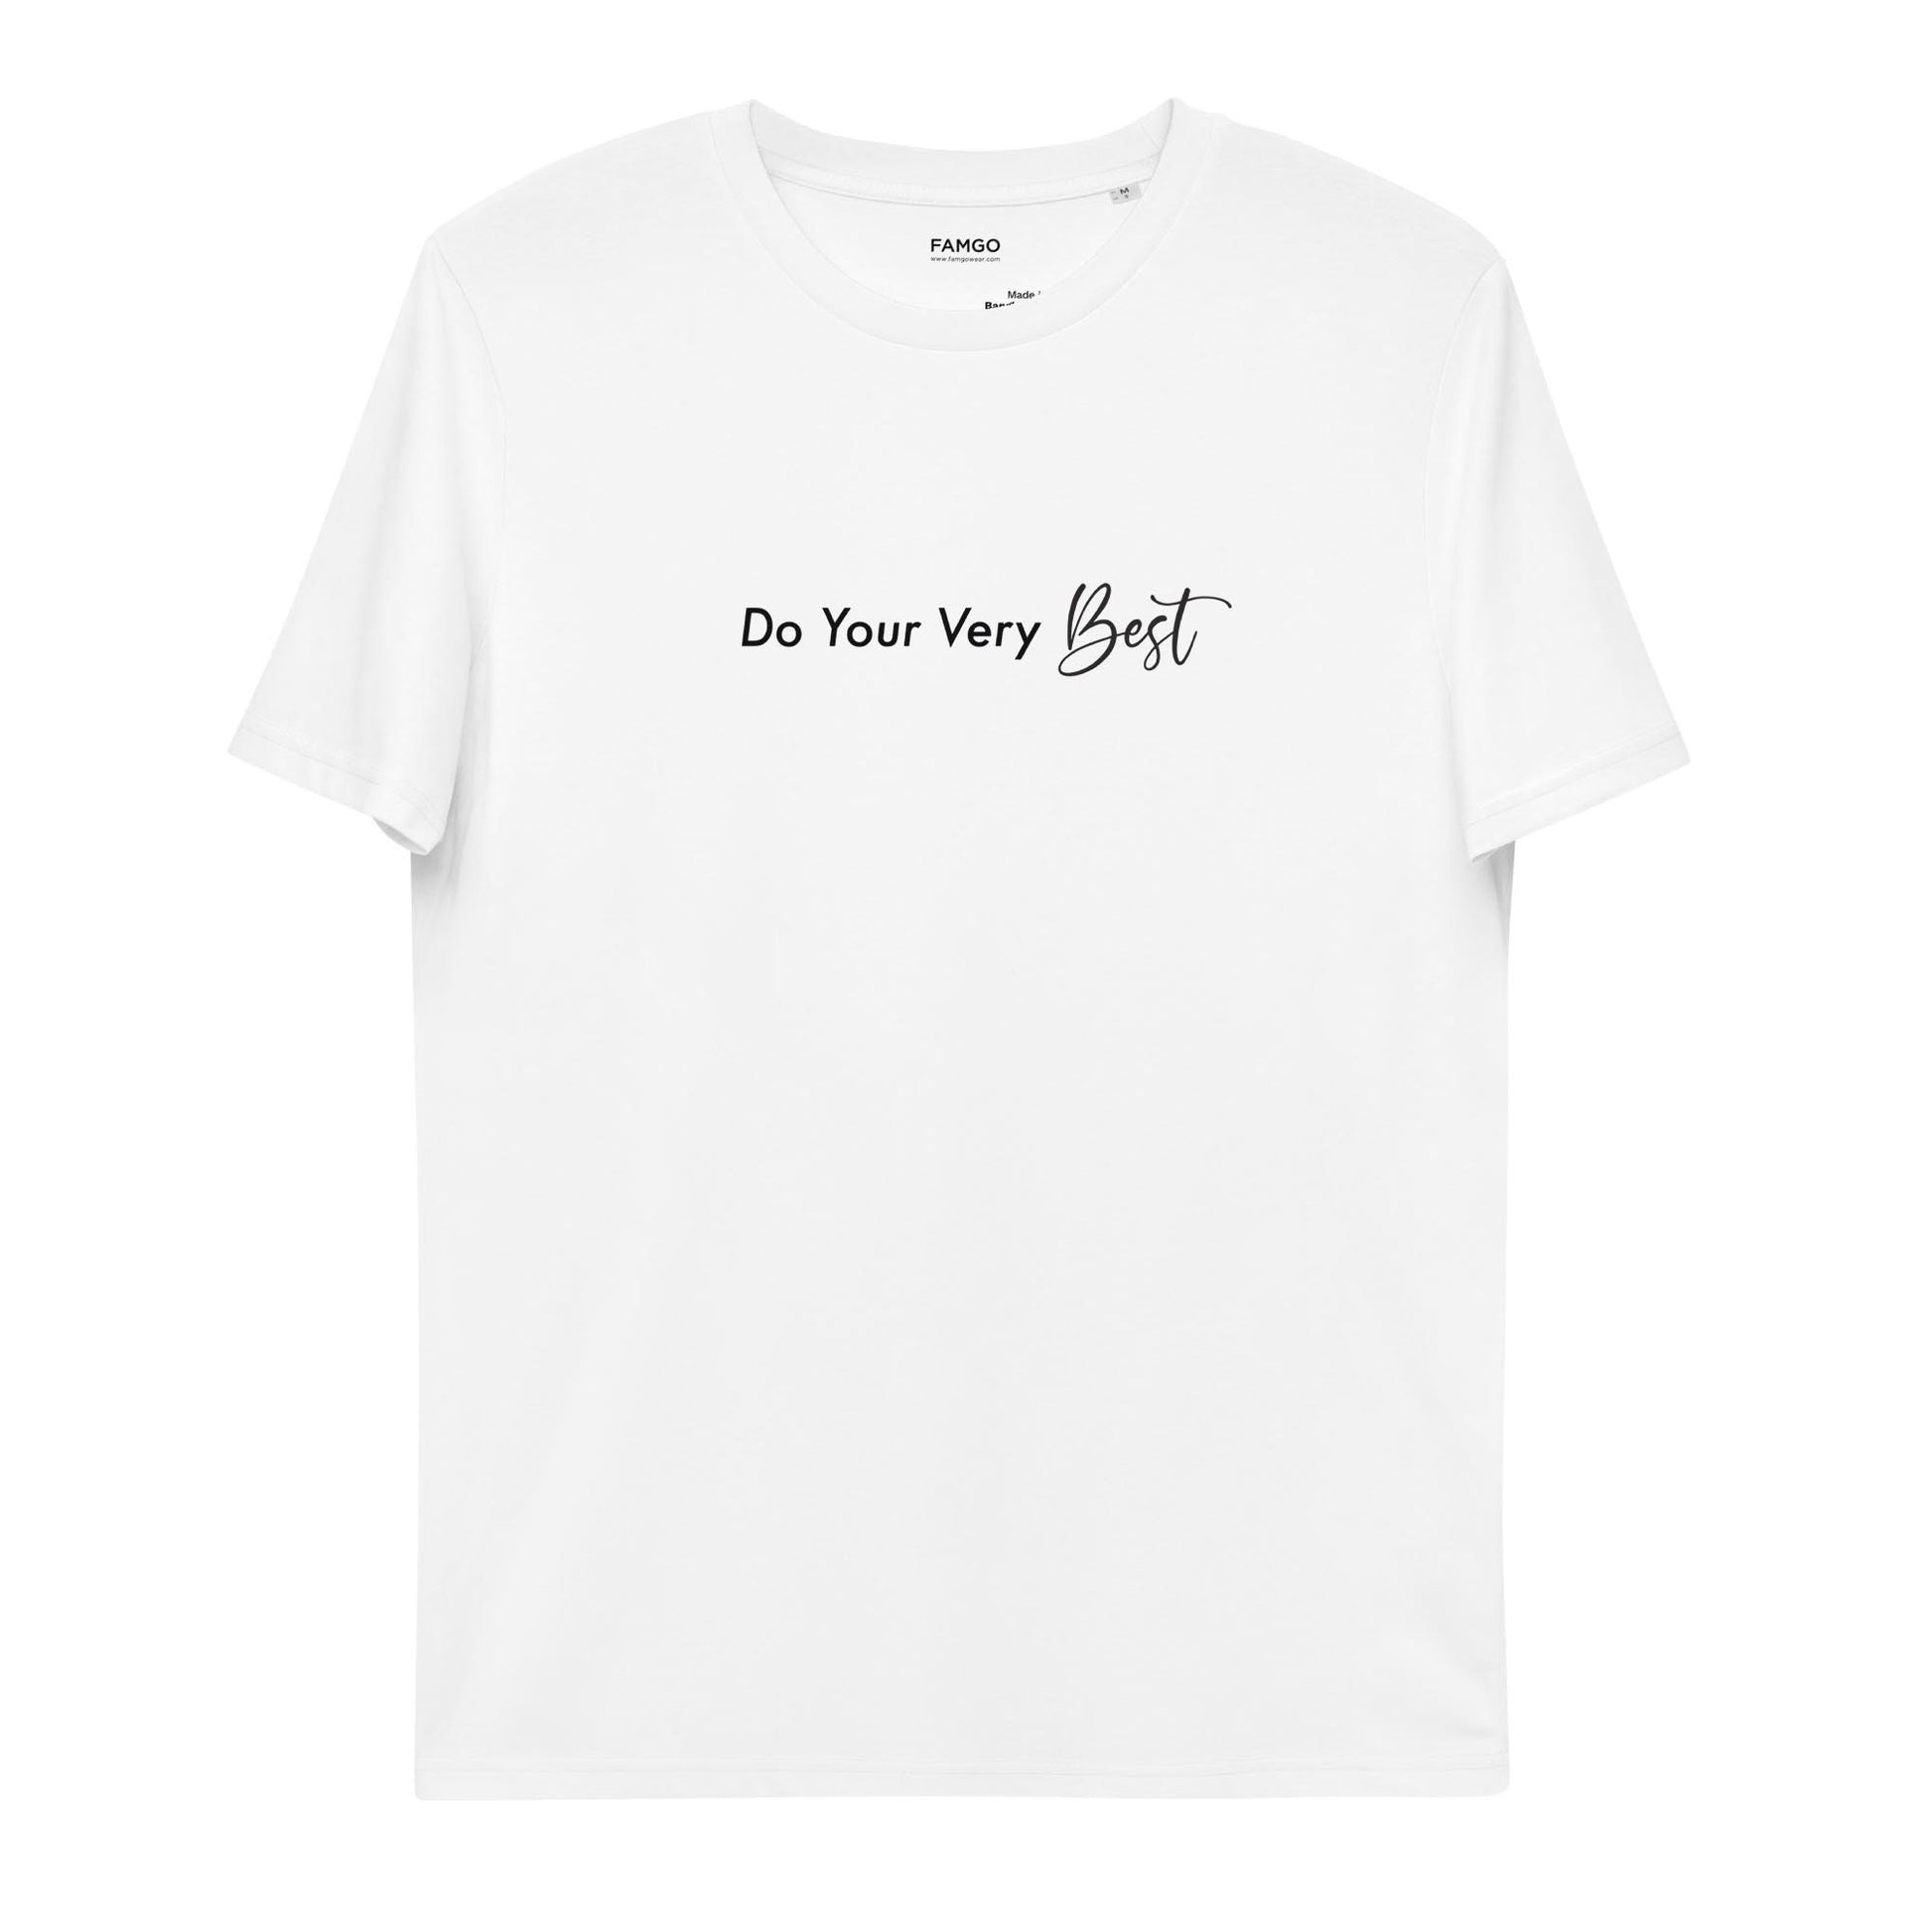 Women white motivational t-shirt with motivational quote, "Do Your Very Best."